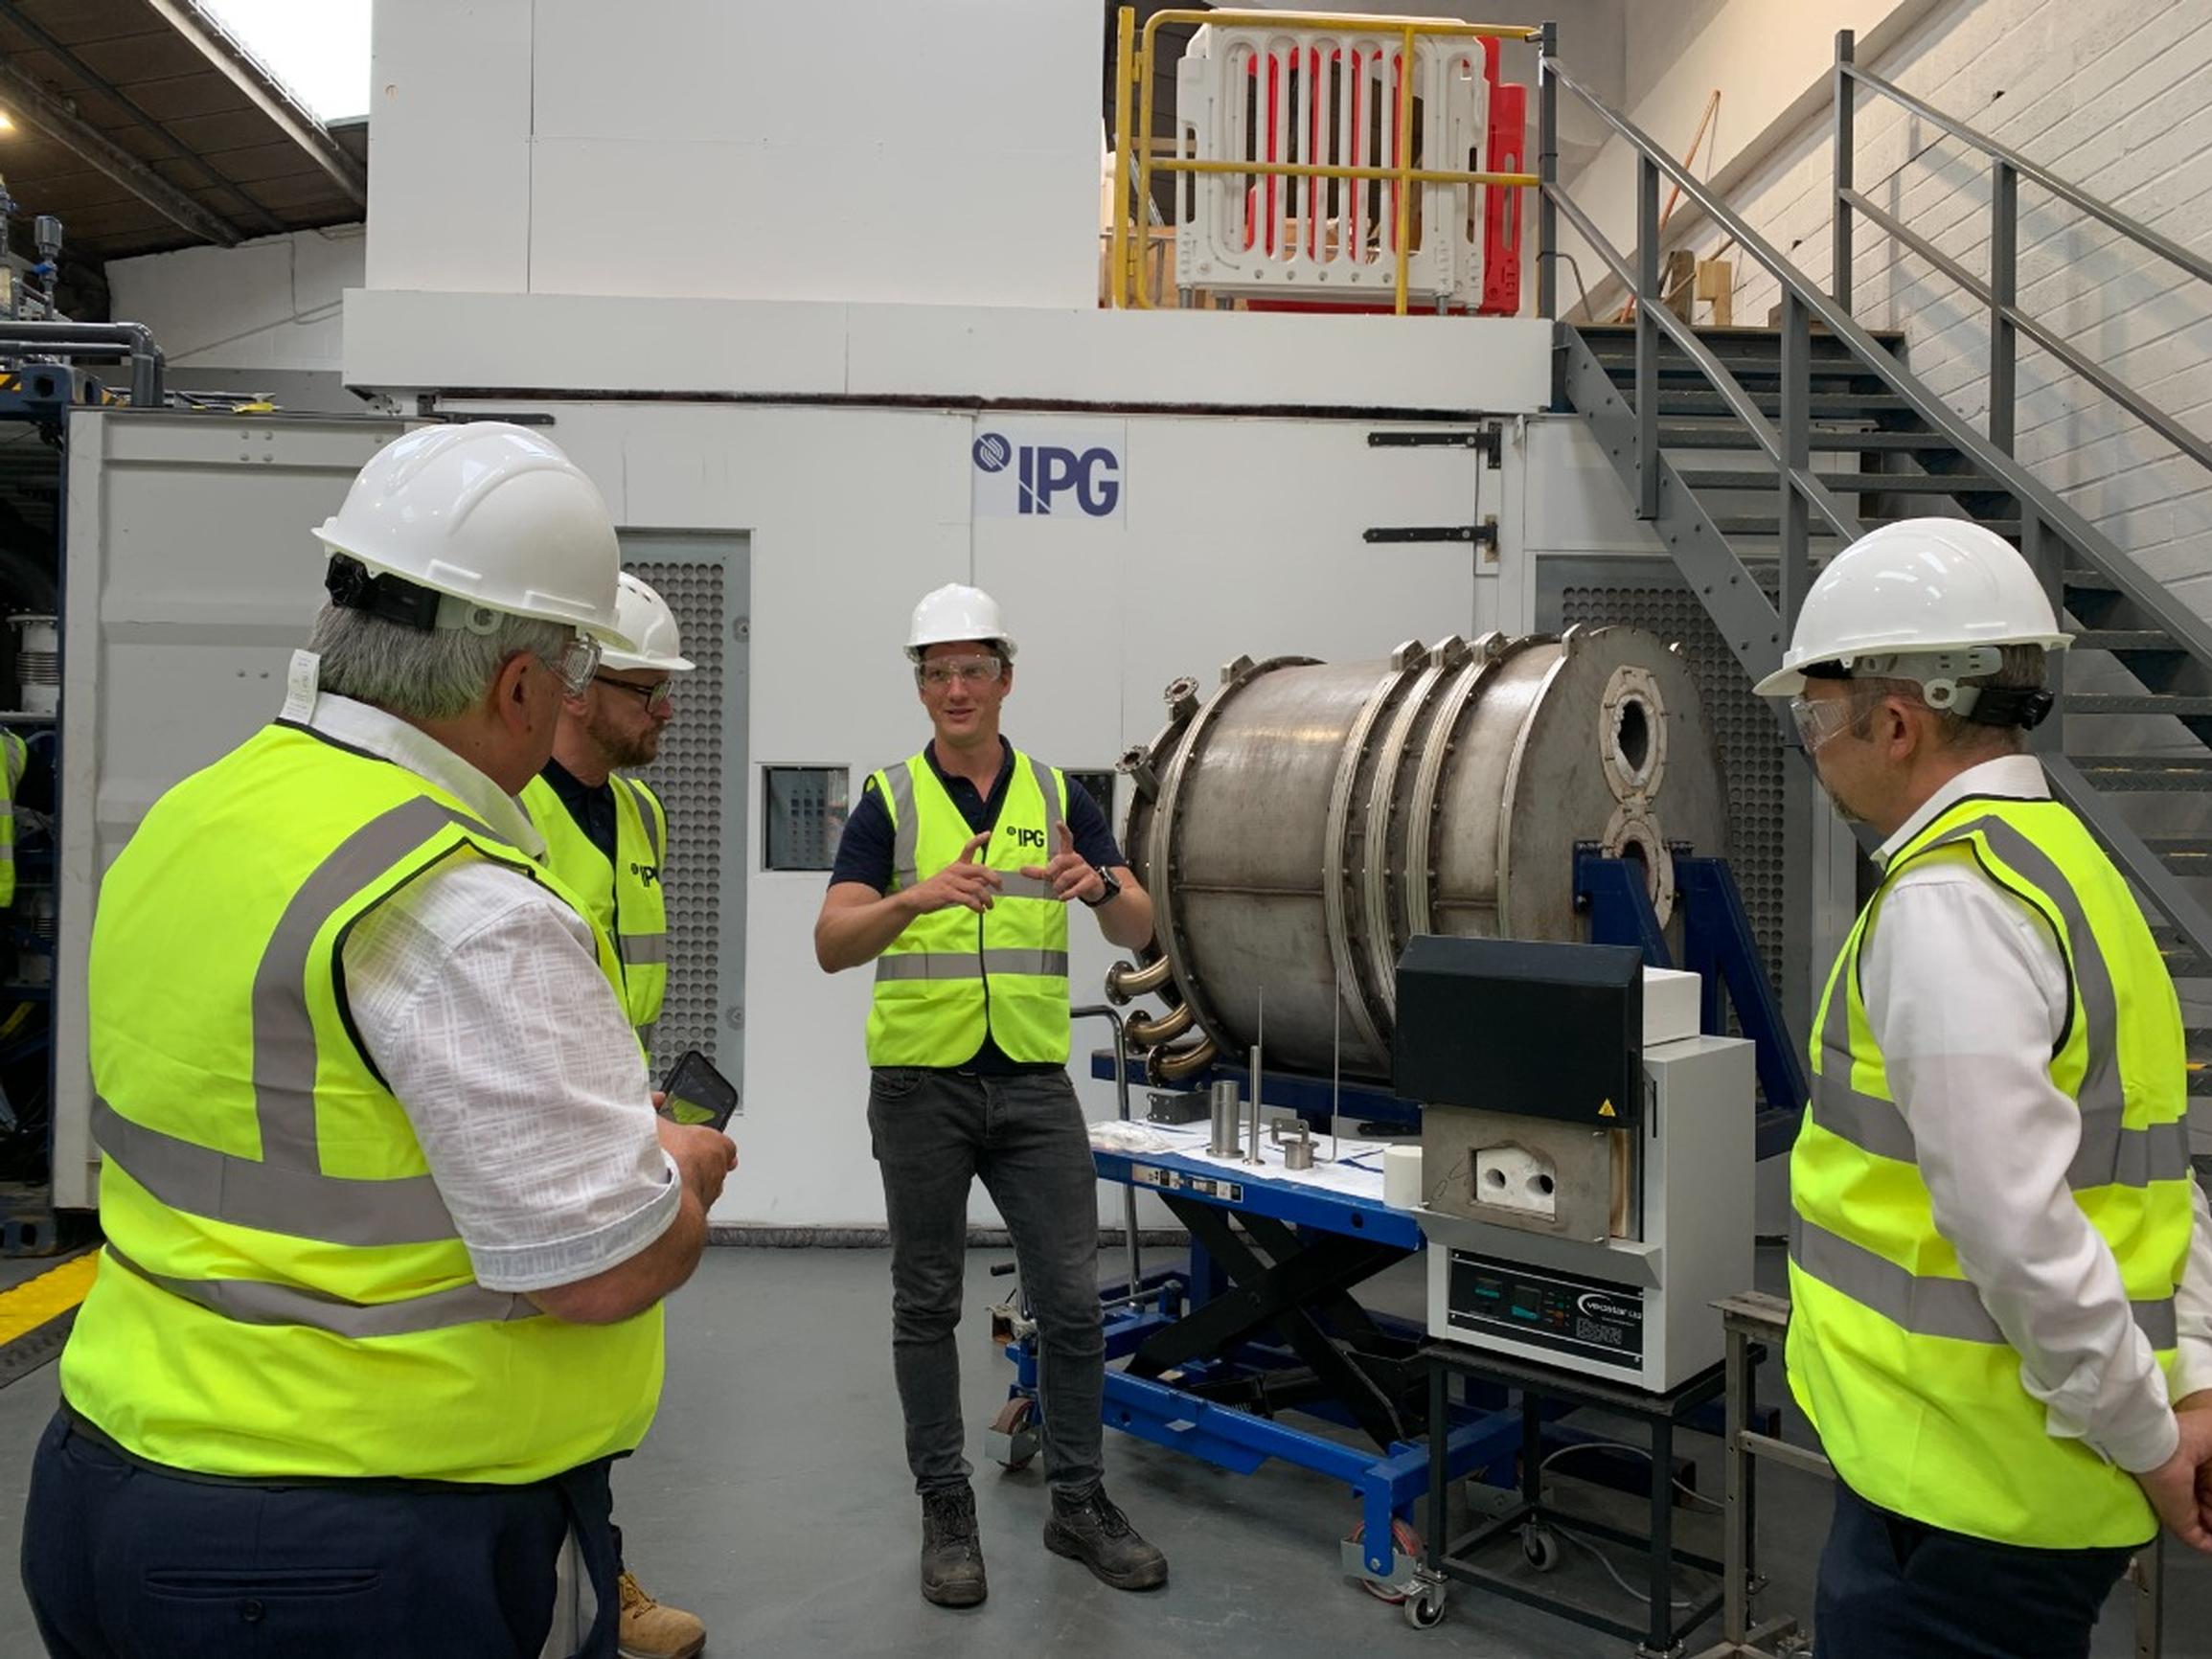 Brett Moolenschot, senior product manager for IPG demonstrates to flameless combustion system to National Highways team